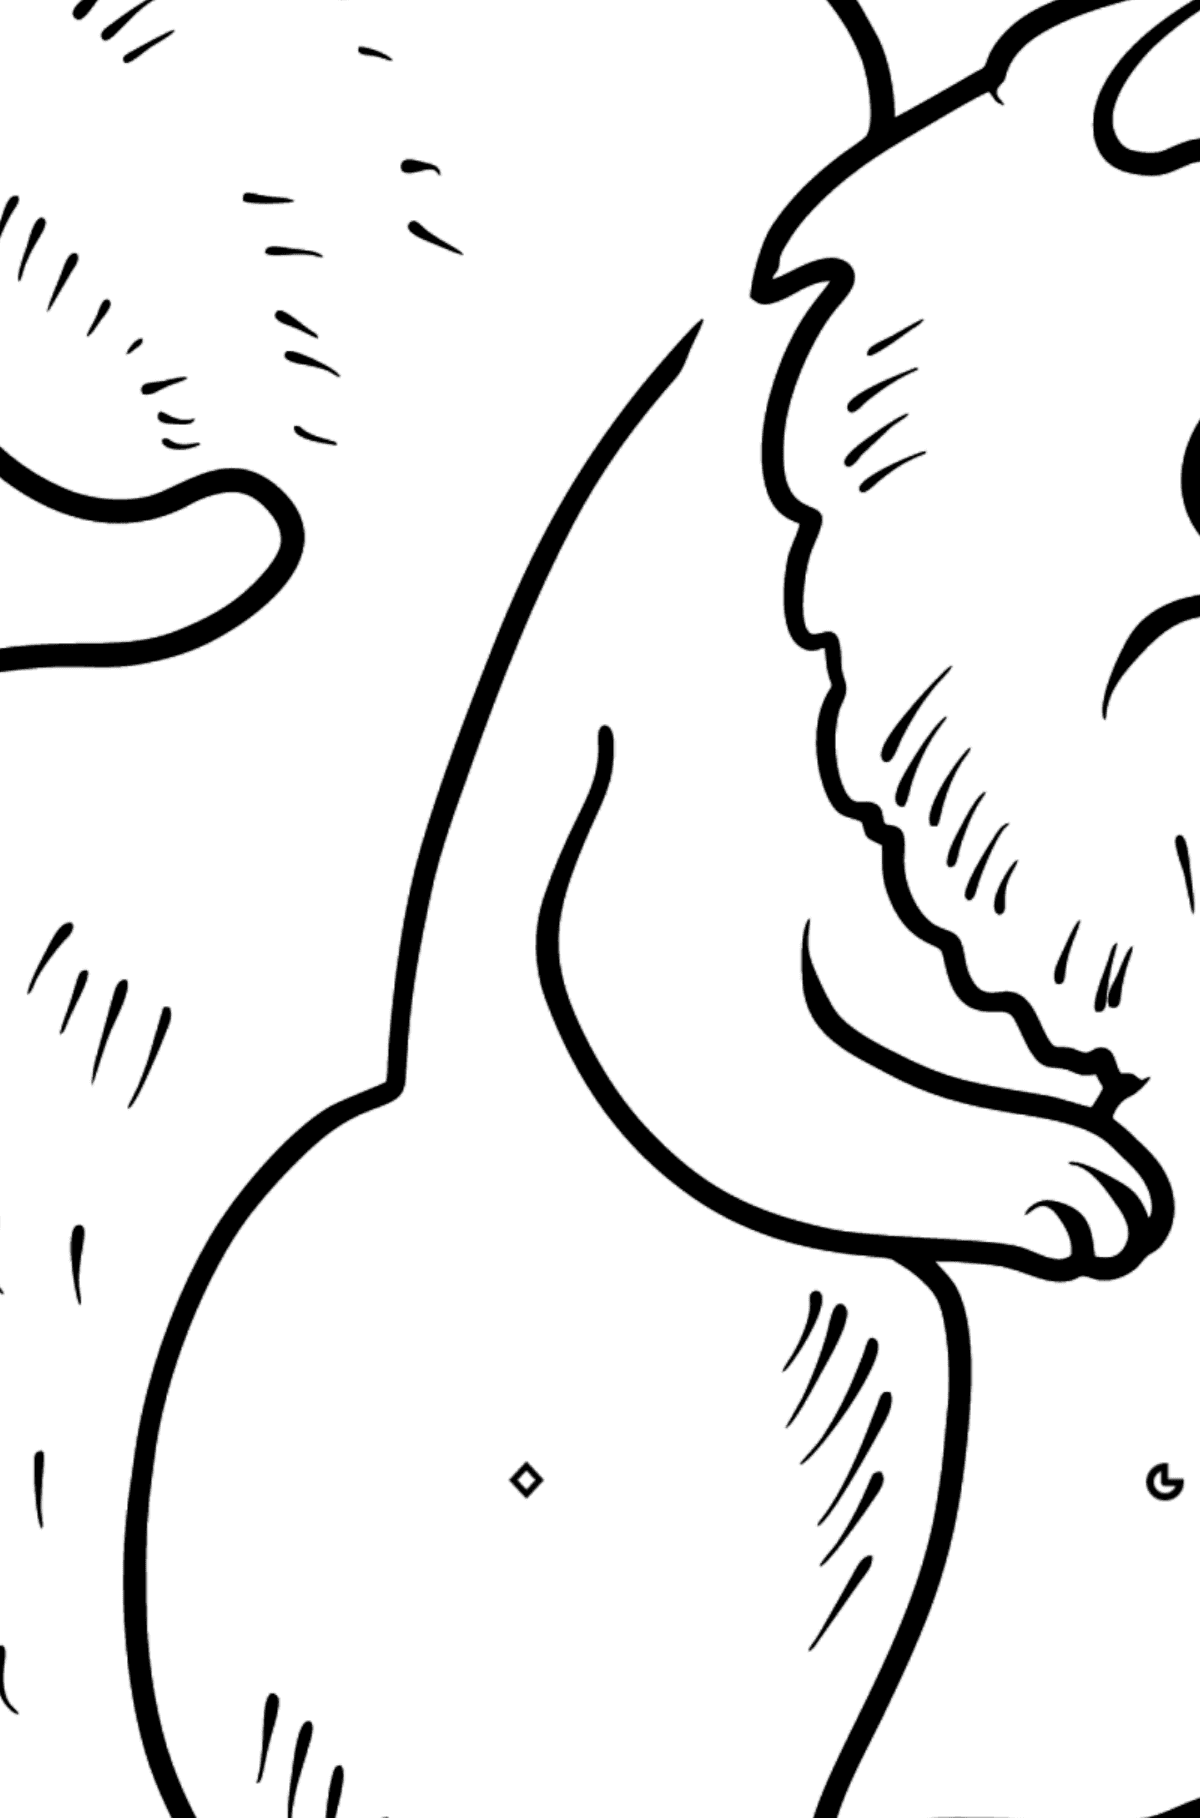 Squirrel coloring page - Coloring by Geometric Shapes for Kids